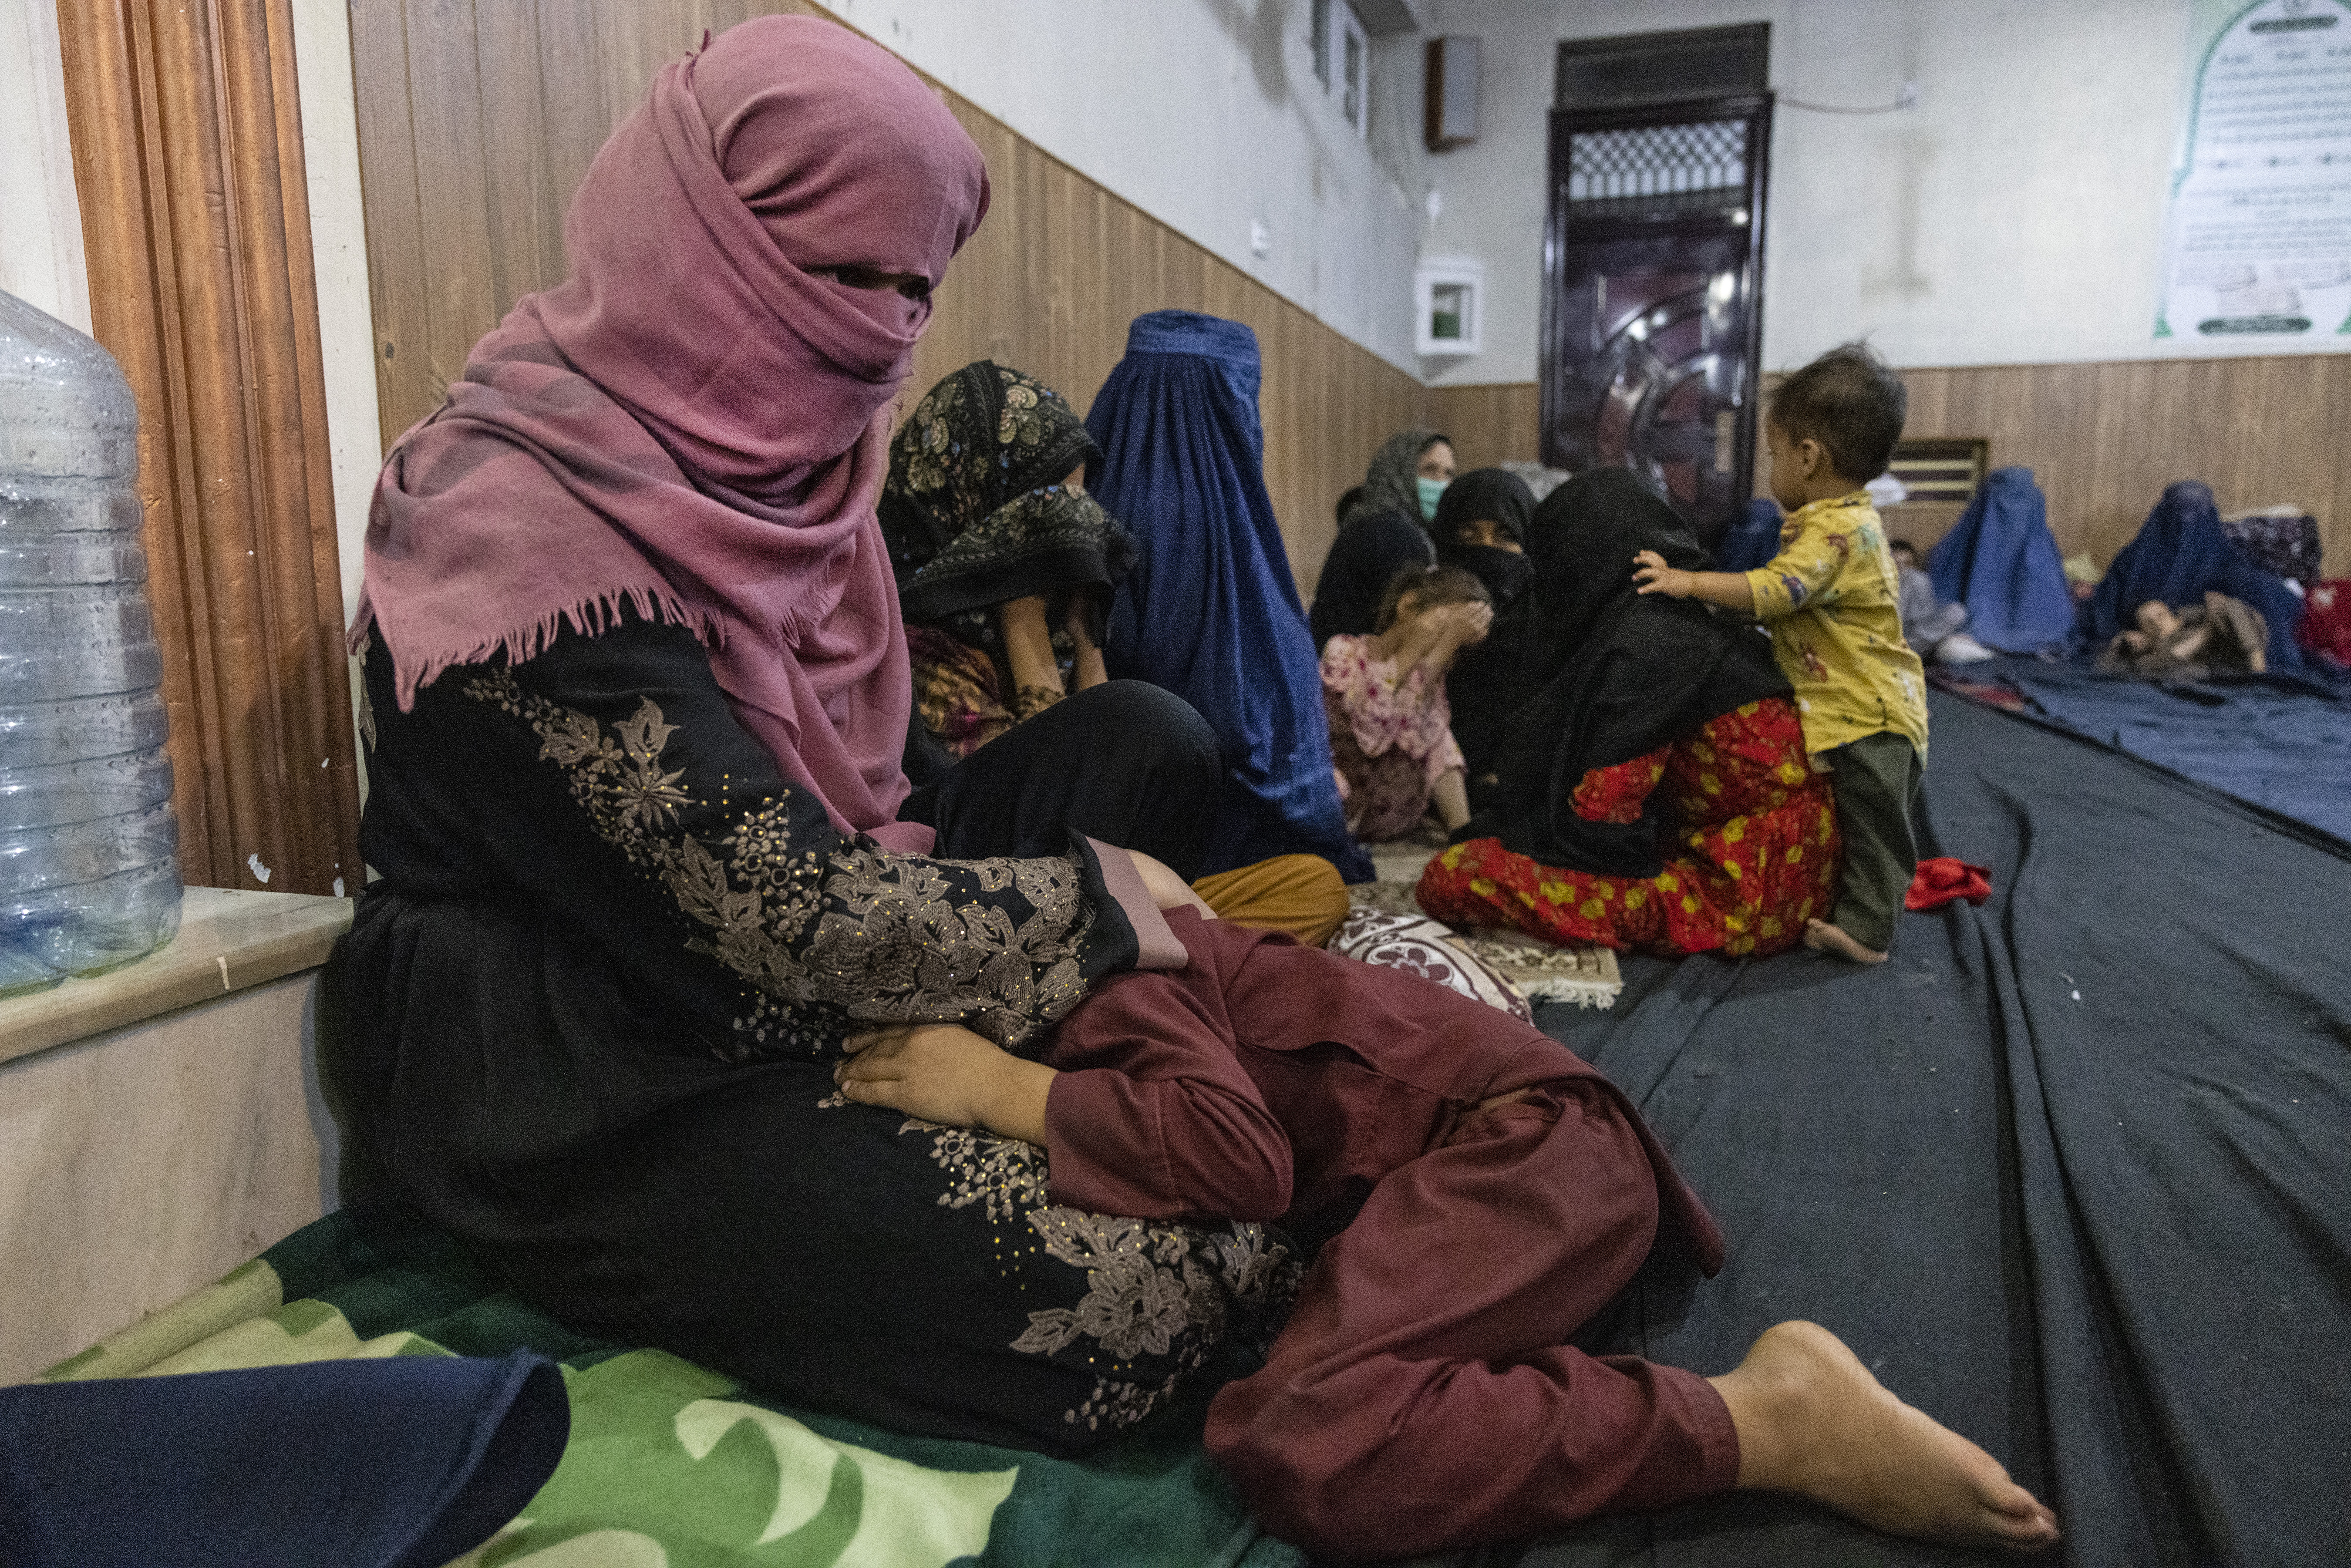 Displaced Afghan women and children from Kunduz are seen at a mosque that is sheltering them on August 13, 2021 in Kabul, Afghanistan.